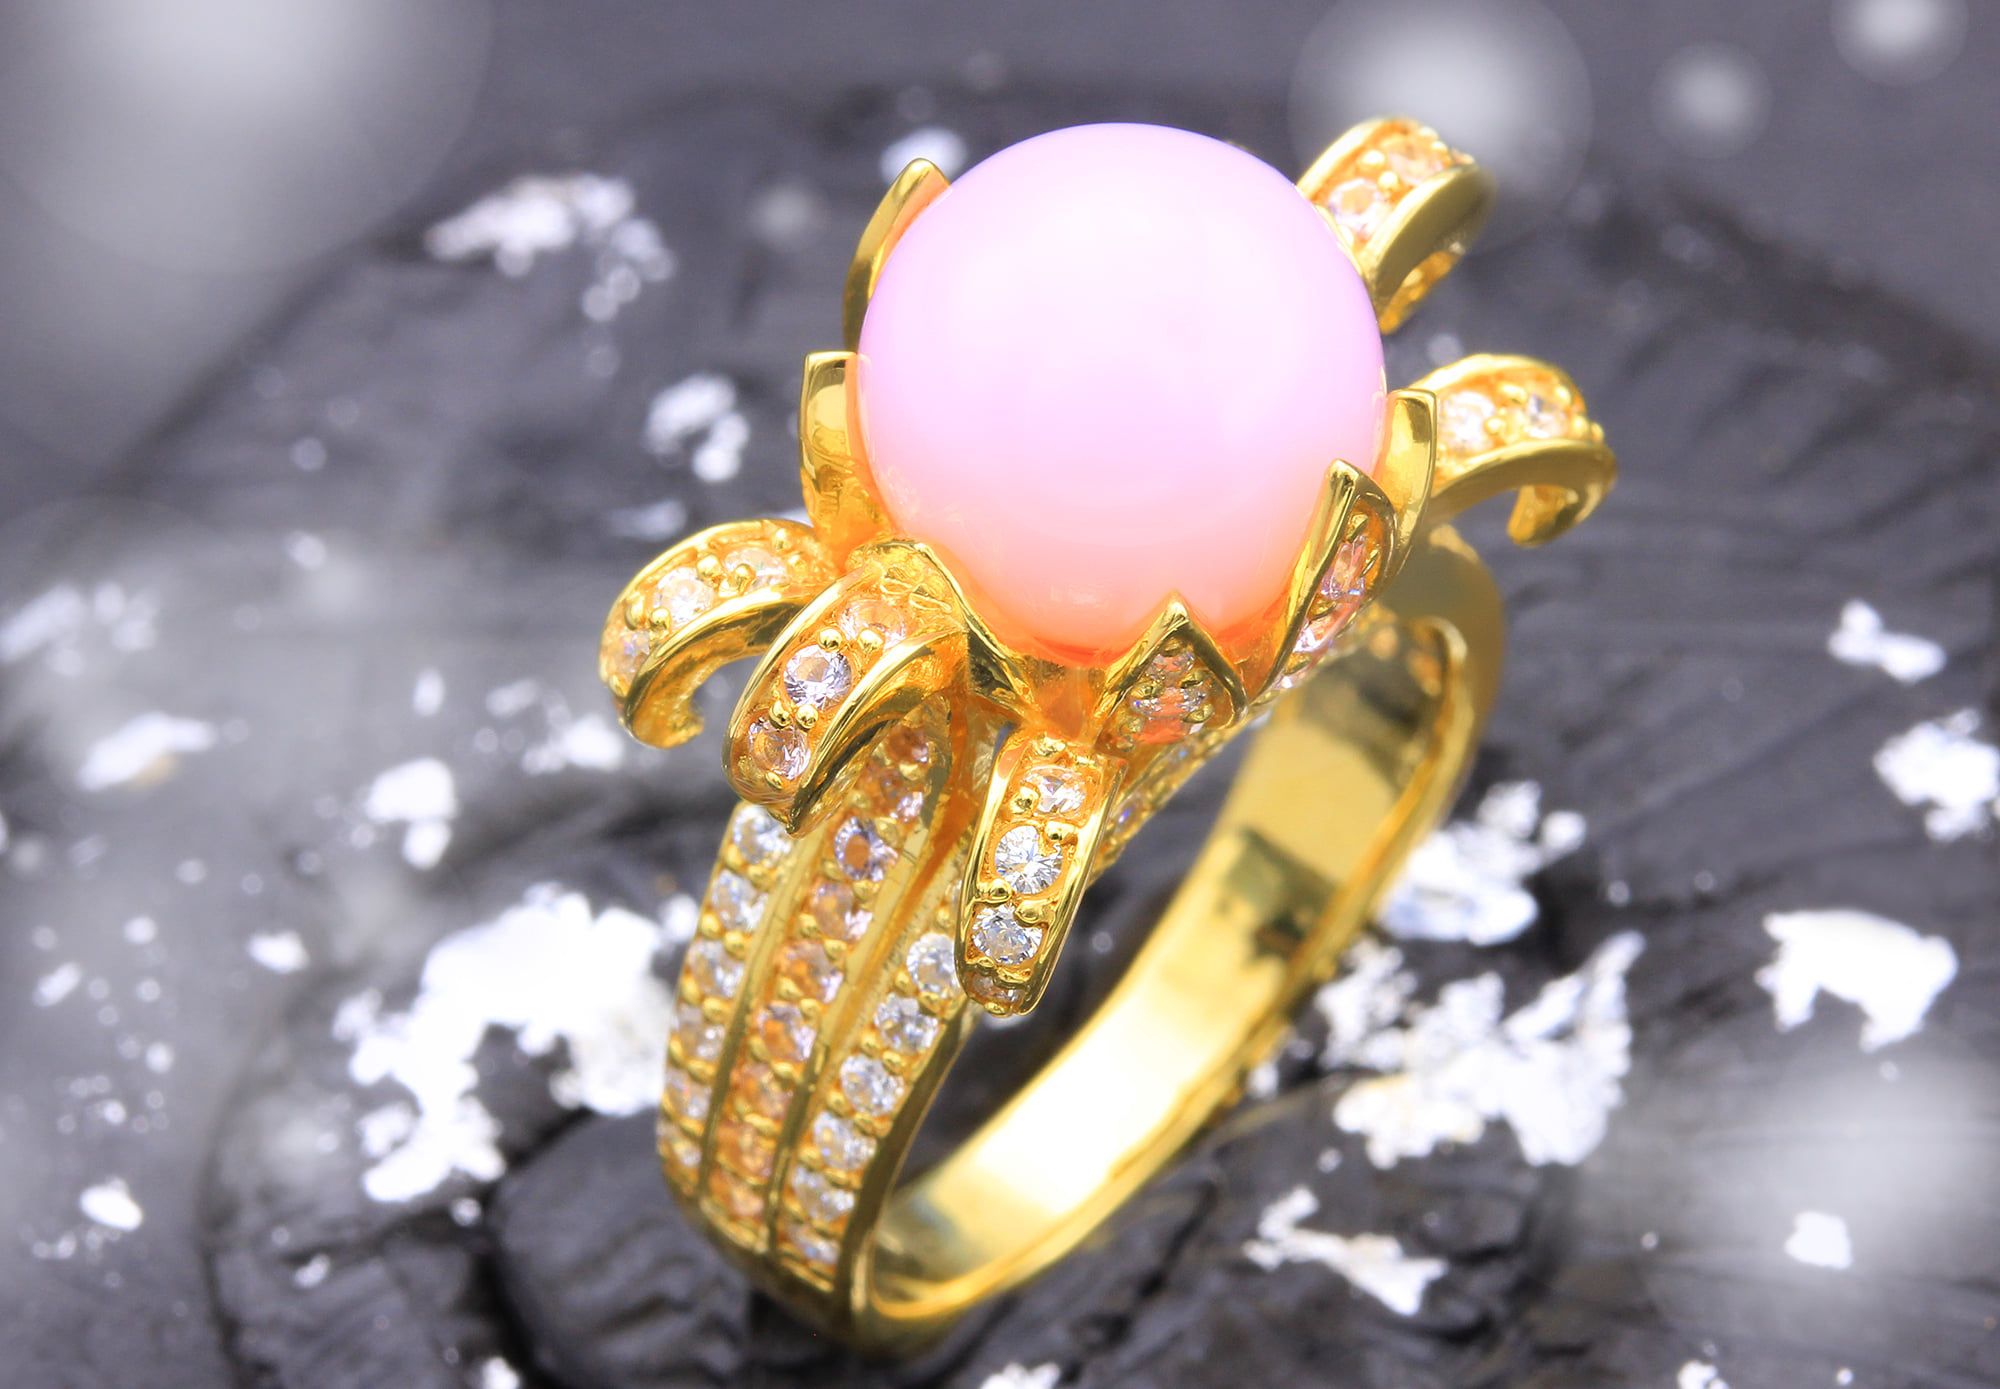 The eye-catching gold plated silver blossom ring with pink opal gemstone reflection and cubic zirconia is always in fashion.